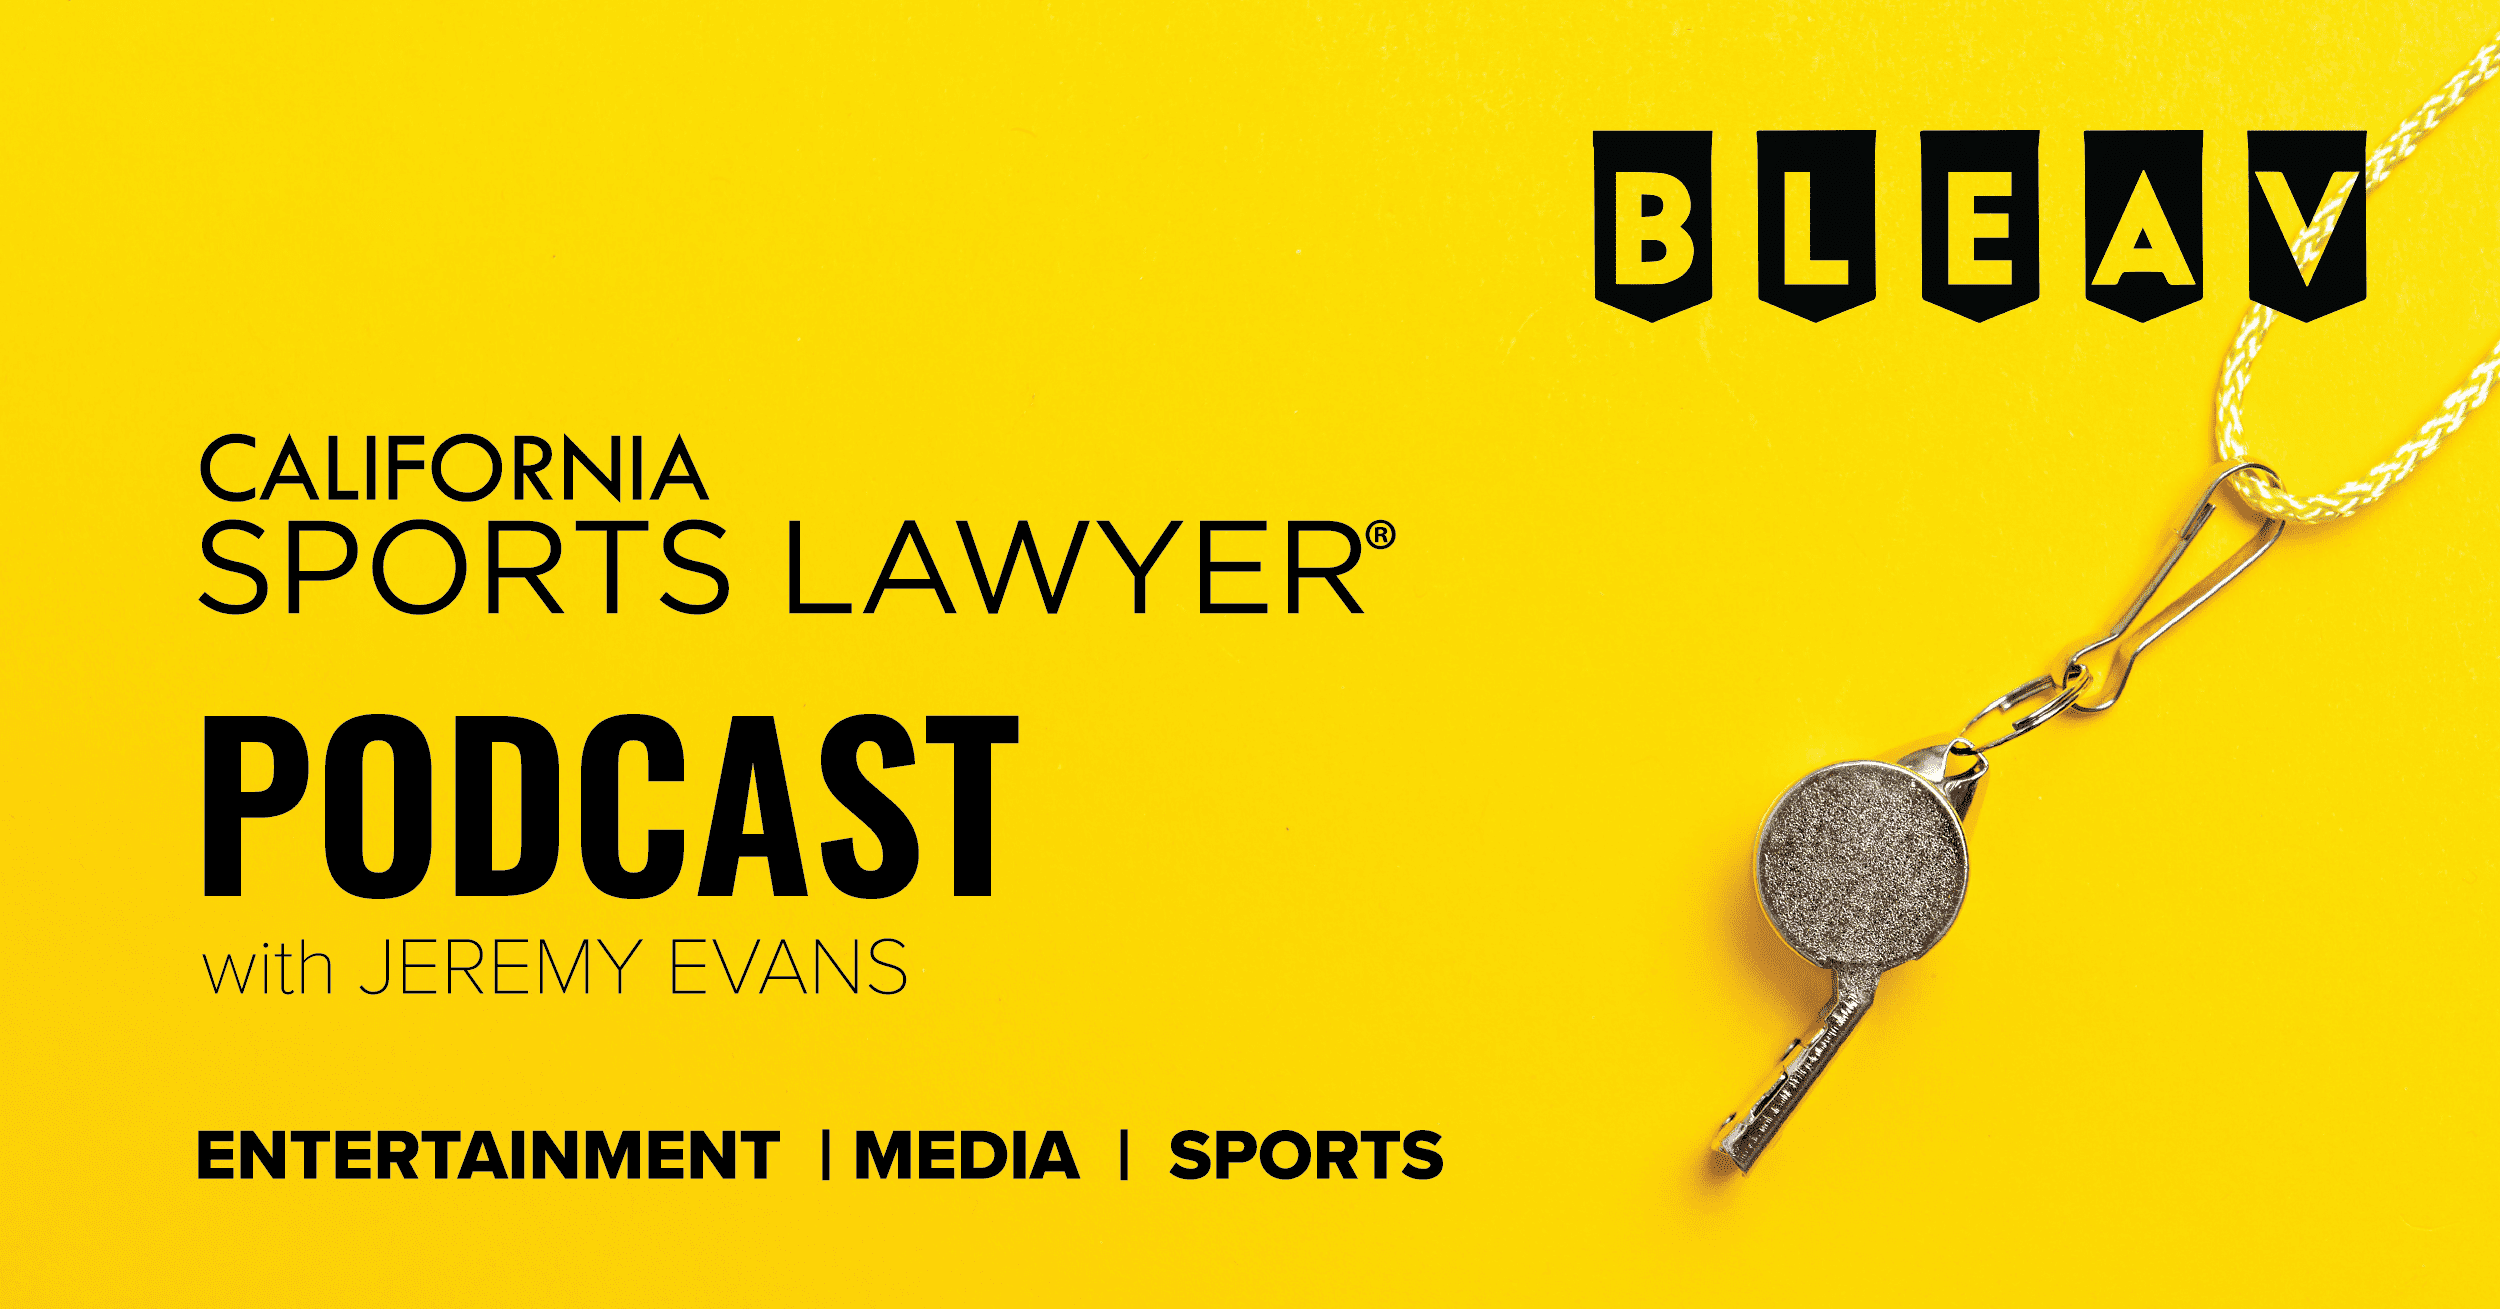 California Sports Lawyer® Podcast with Jeremy Evans: New Leagues Provide Opportunities, Leadership and Governance are Essential